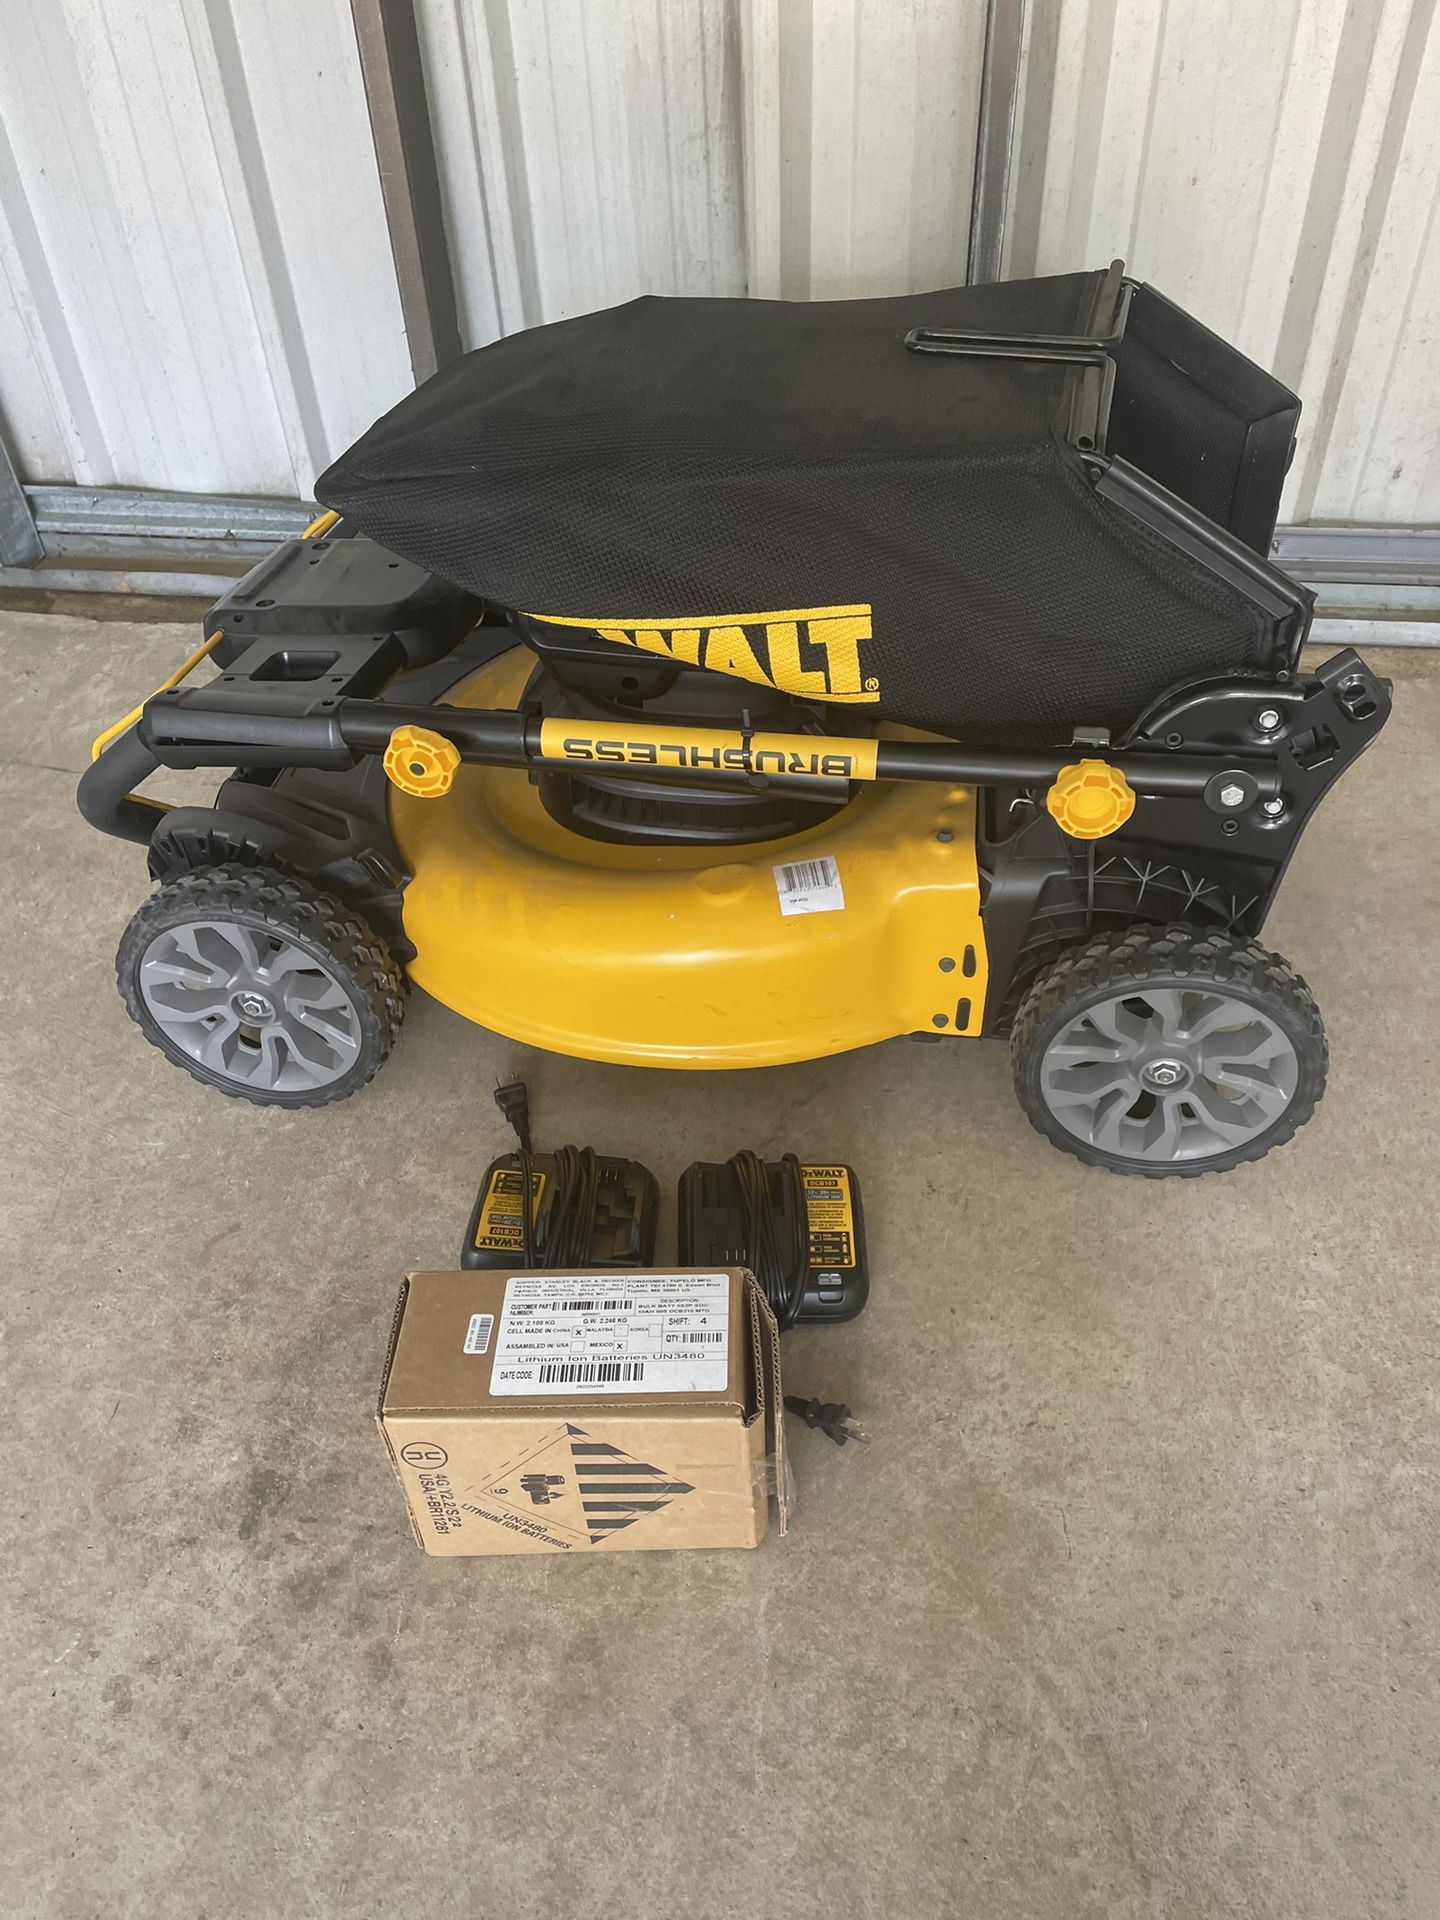 BRAND NEW DEWALT ELECTRIC Self Propelled MOWER TWO BATTERIES INCLUDED!! I